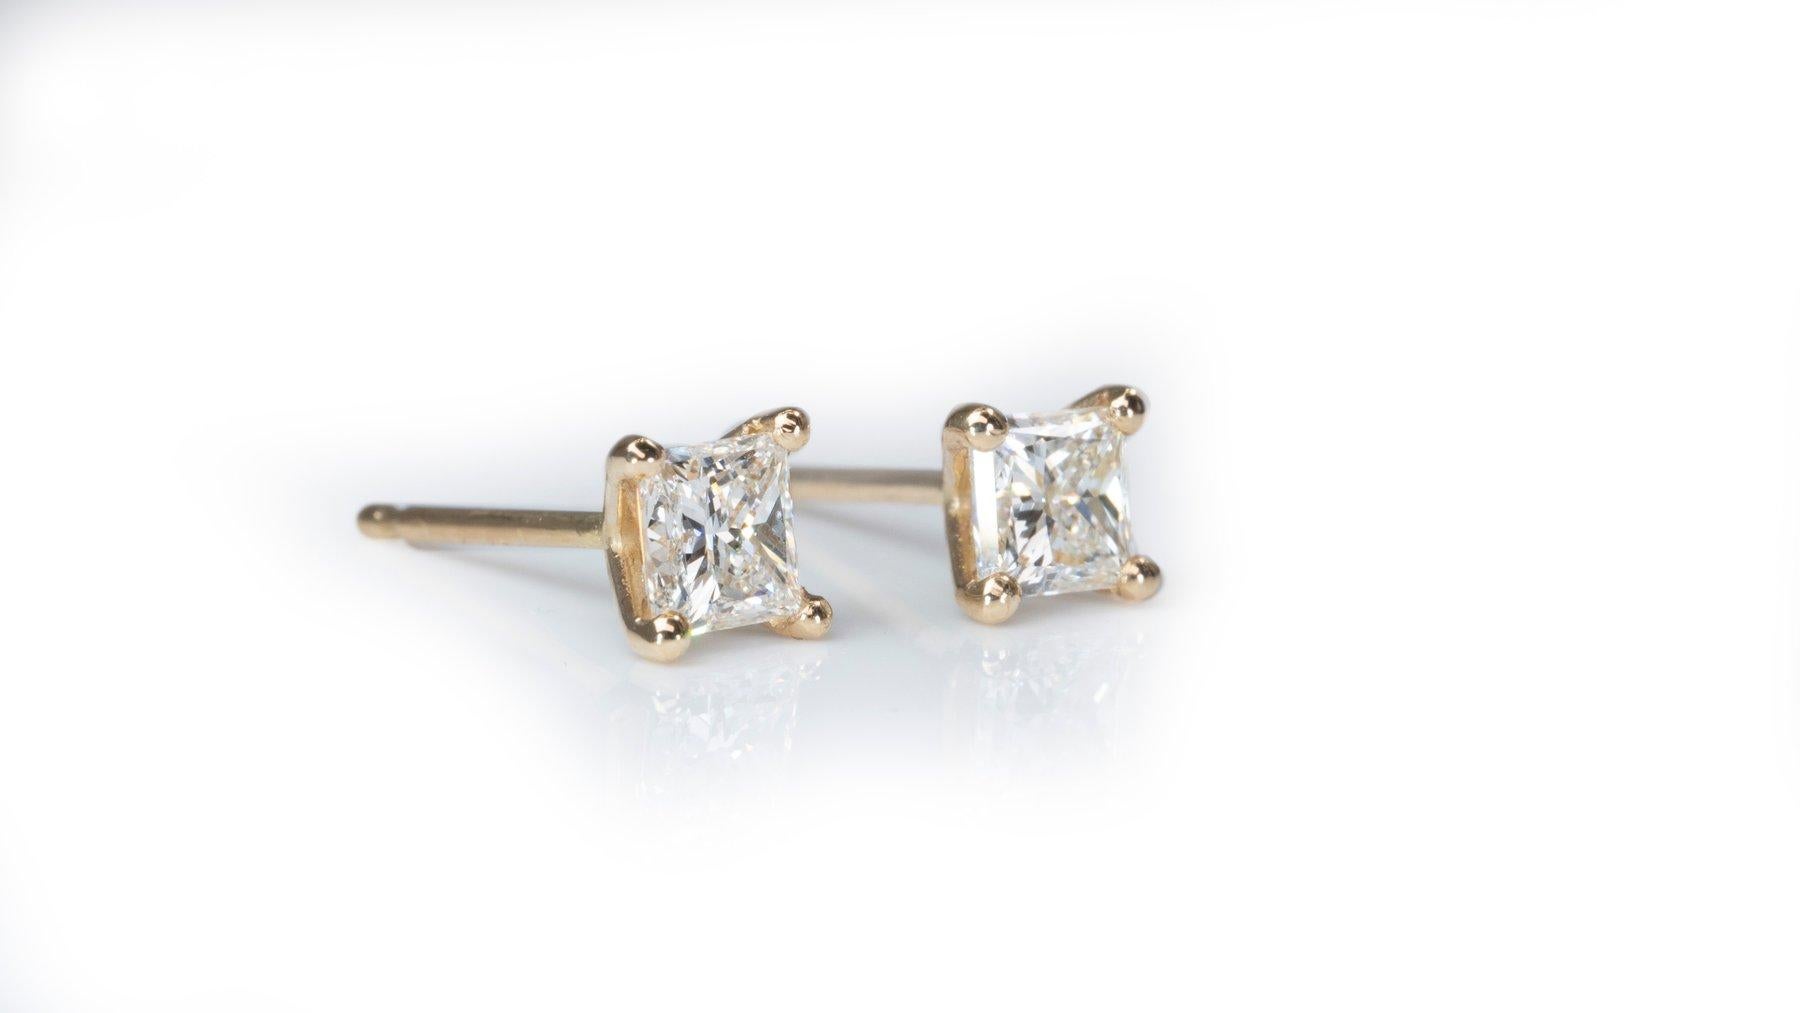 Elegant 1.86ct Diamond Stud Earrings in 18k Yellow Gold - GIA Certified 

Discover elegance with these stunning diamond earrings, crafted from 18k yellow gold for a timeless look. Each earring features a beautiful square diamond, offering a combined